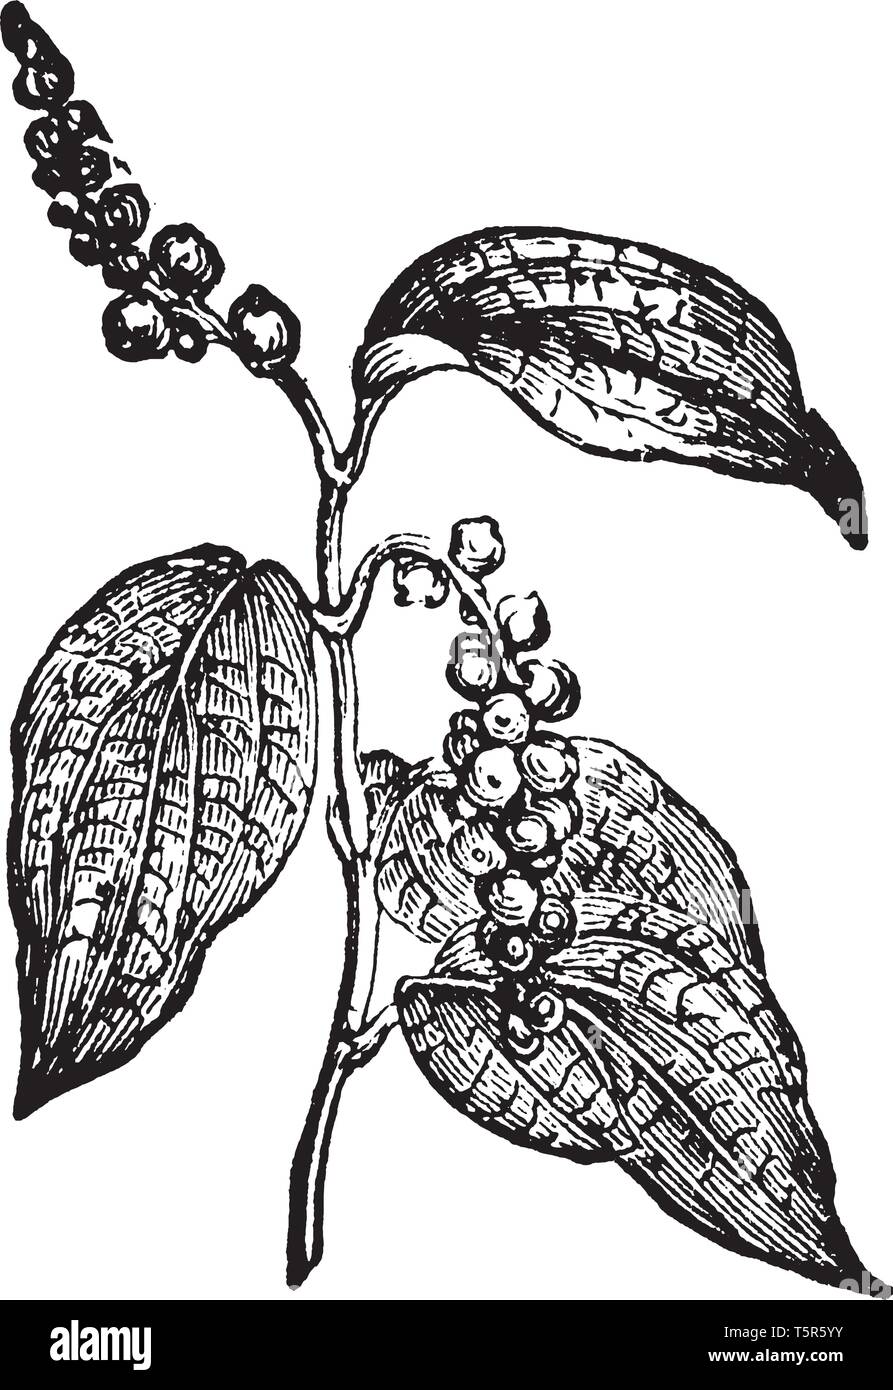 Black pepper is a flowering vine in the family Piperaceae. Seed spirally arranged on stem. Leaves are ovoid shaped, vintage line drawing or engraving  Stock Vector